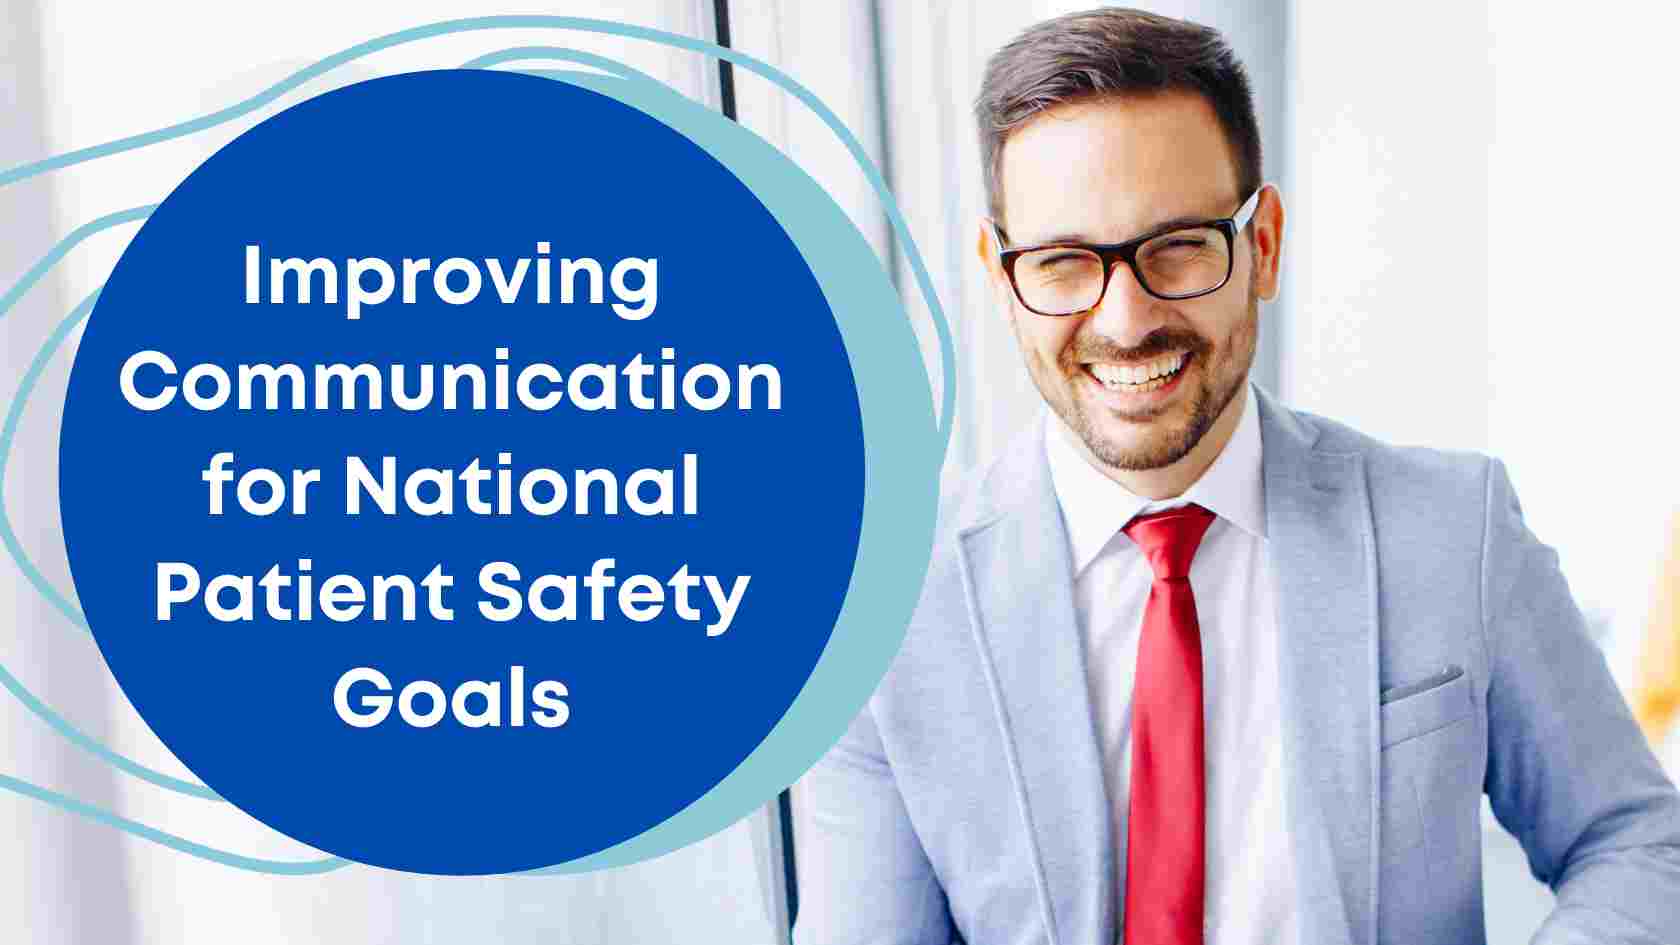 Improving Communication for National Patient Safety Goals